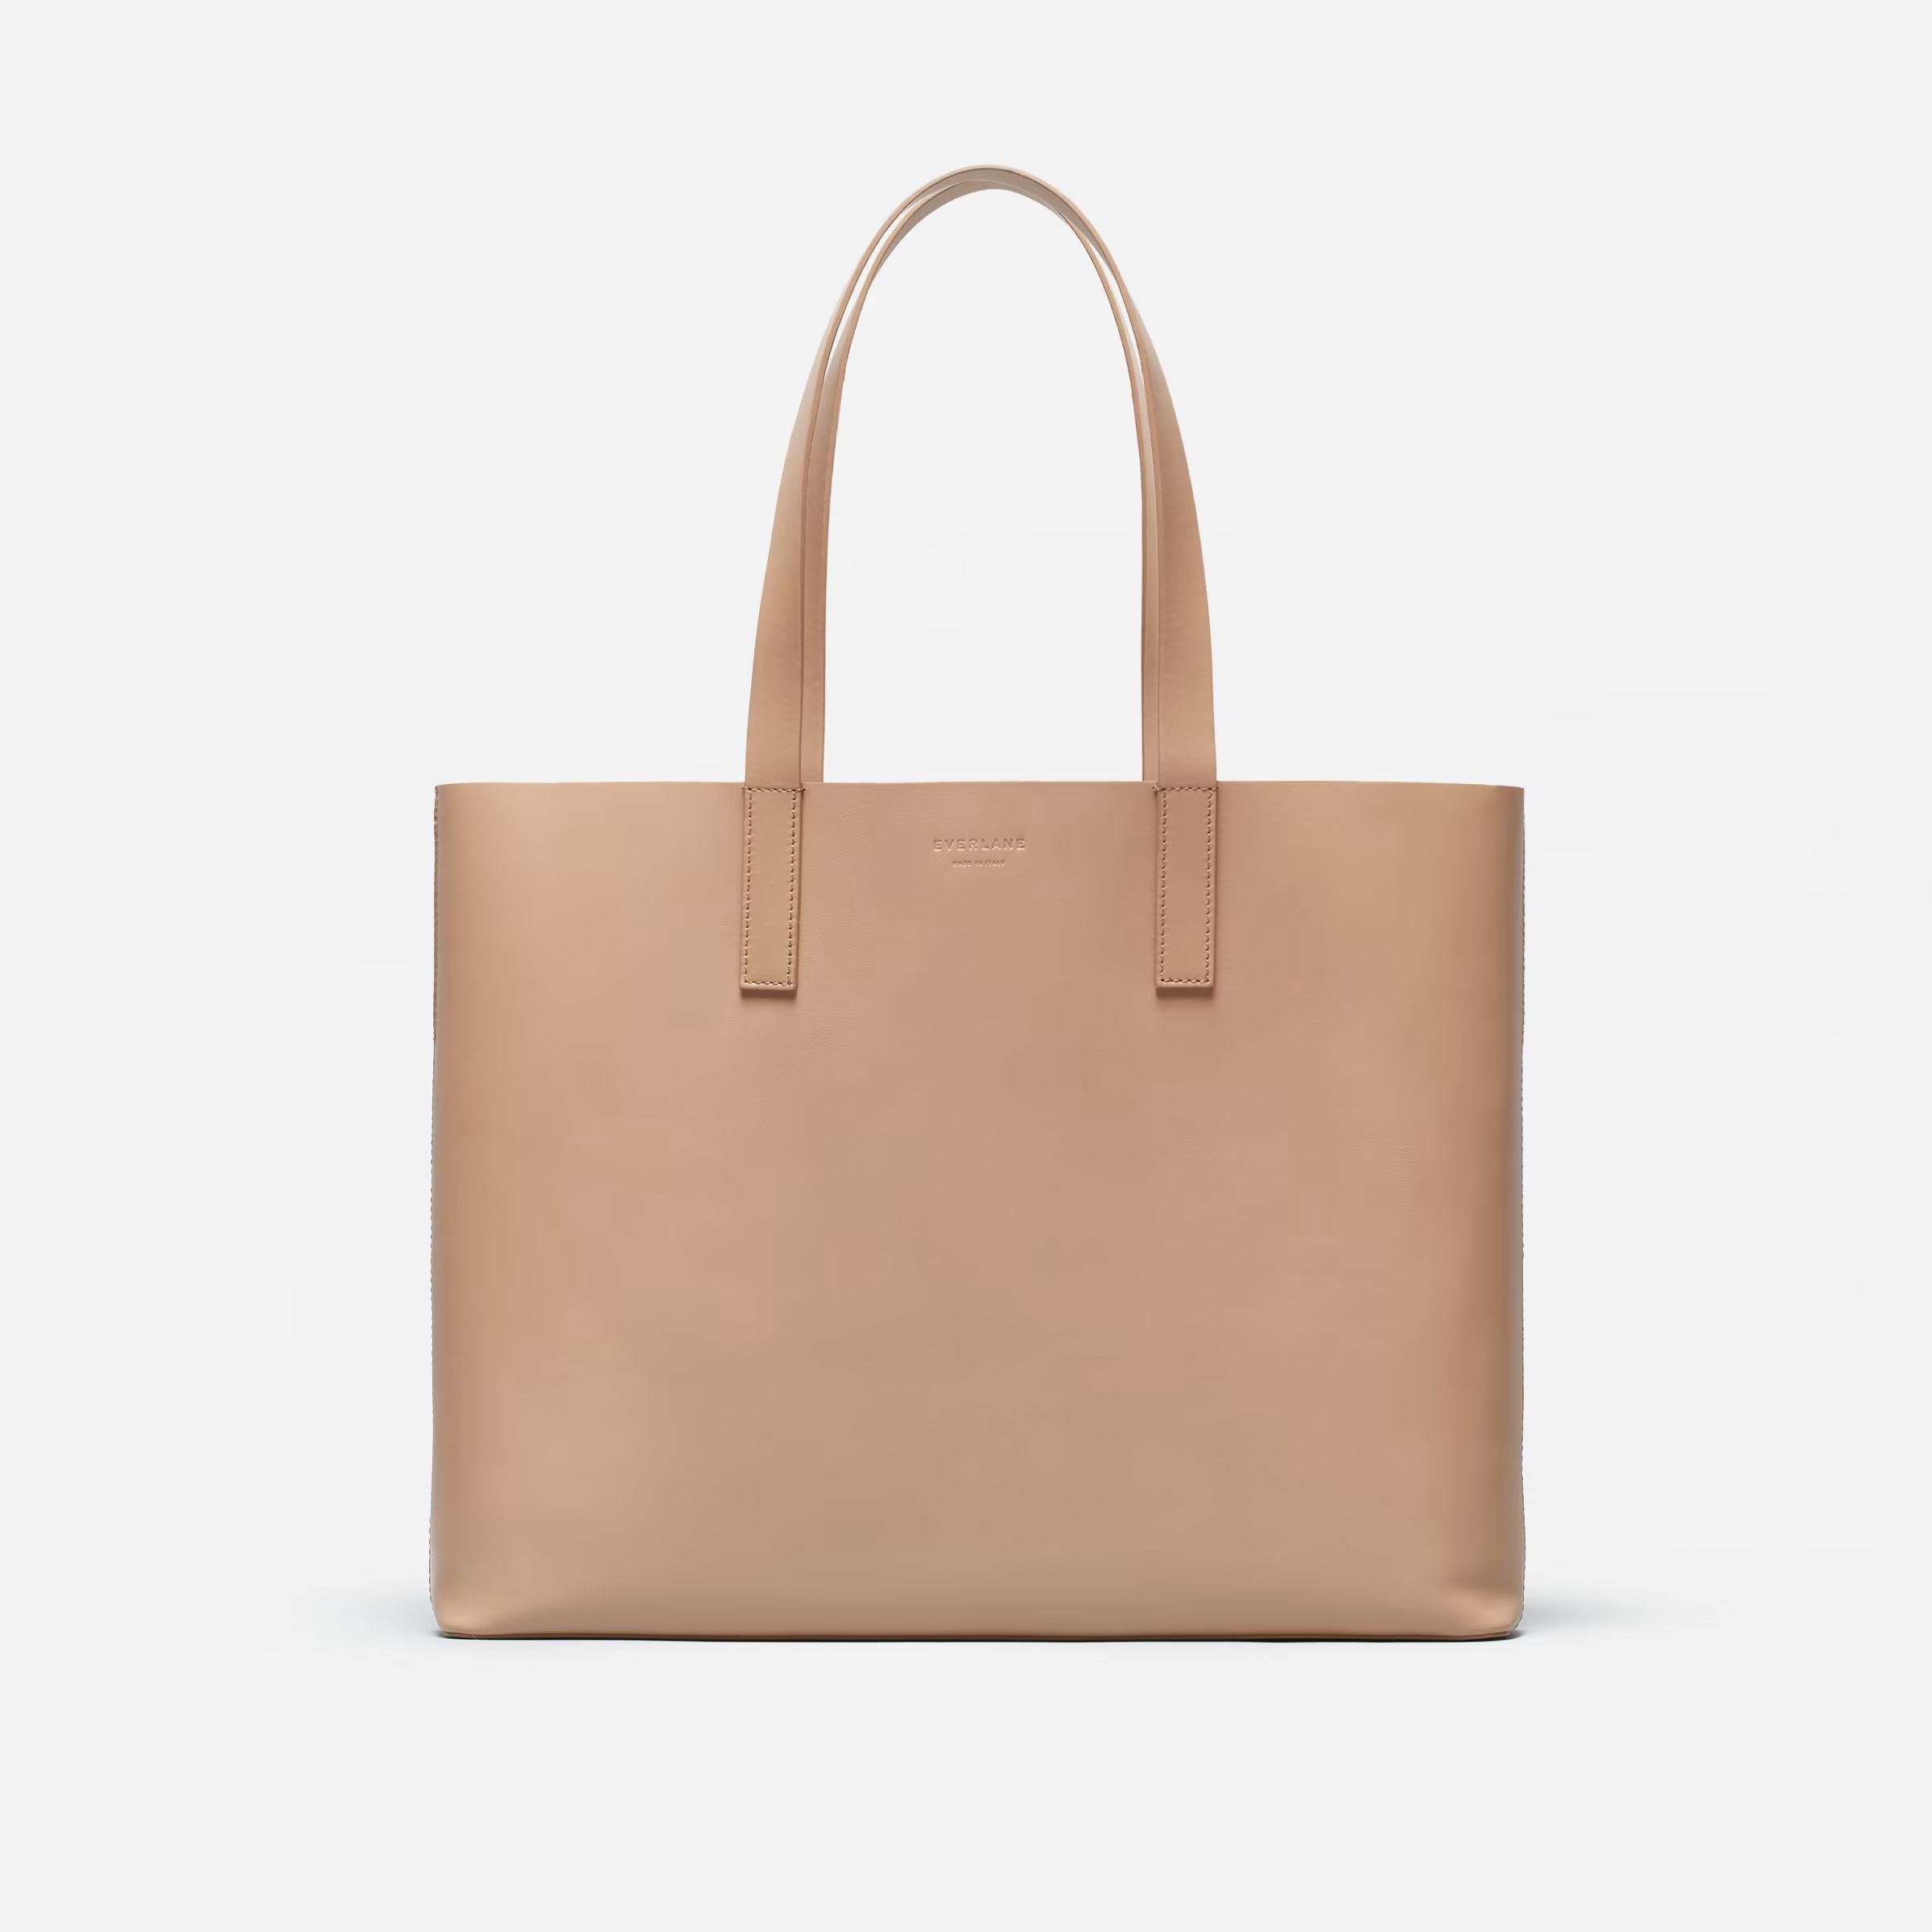 The Day Market Tote – $175 | Everlane